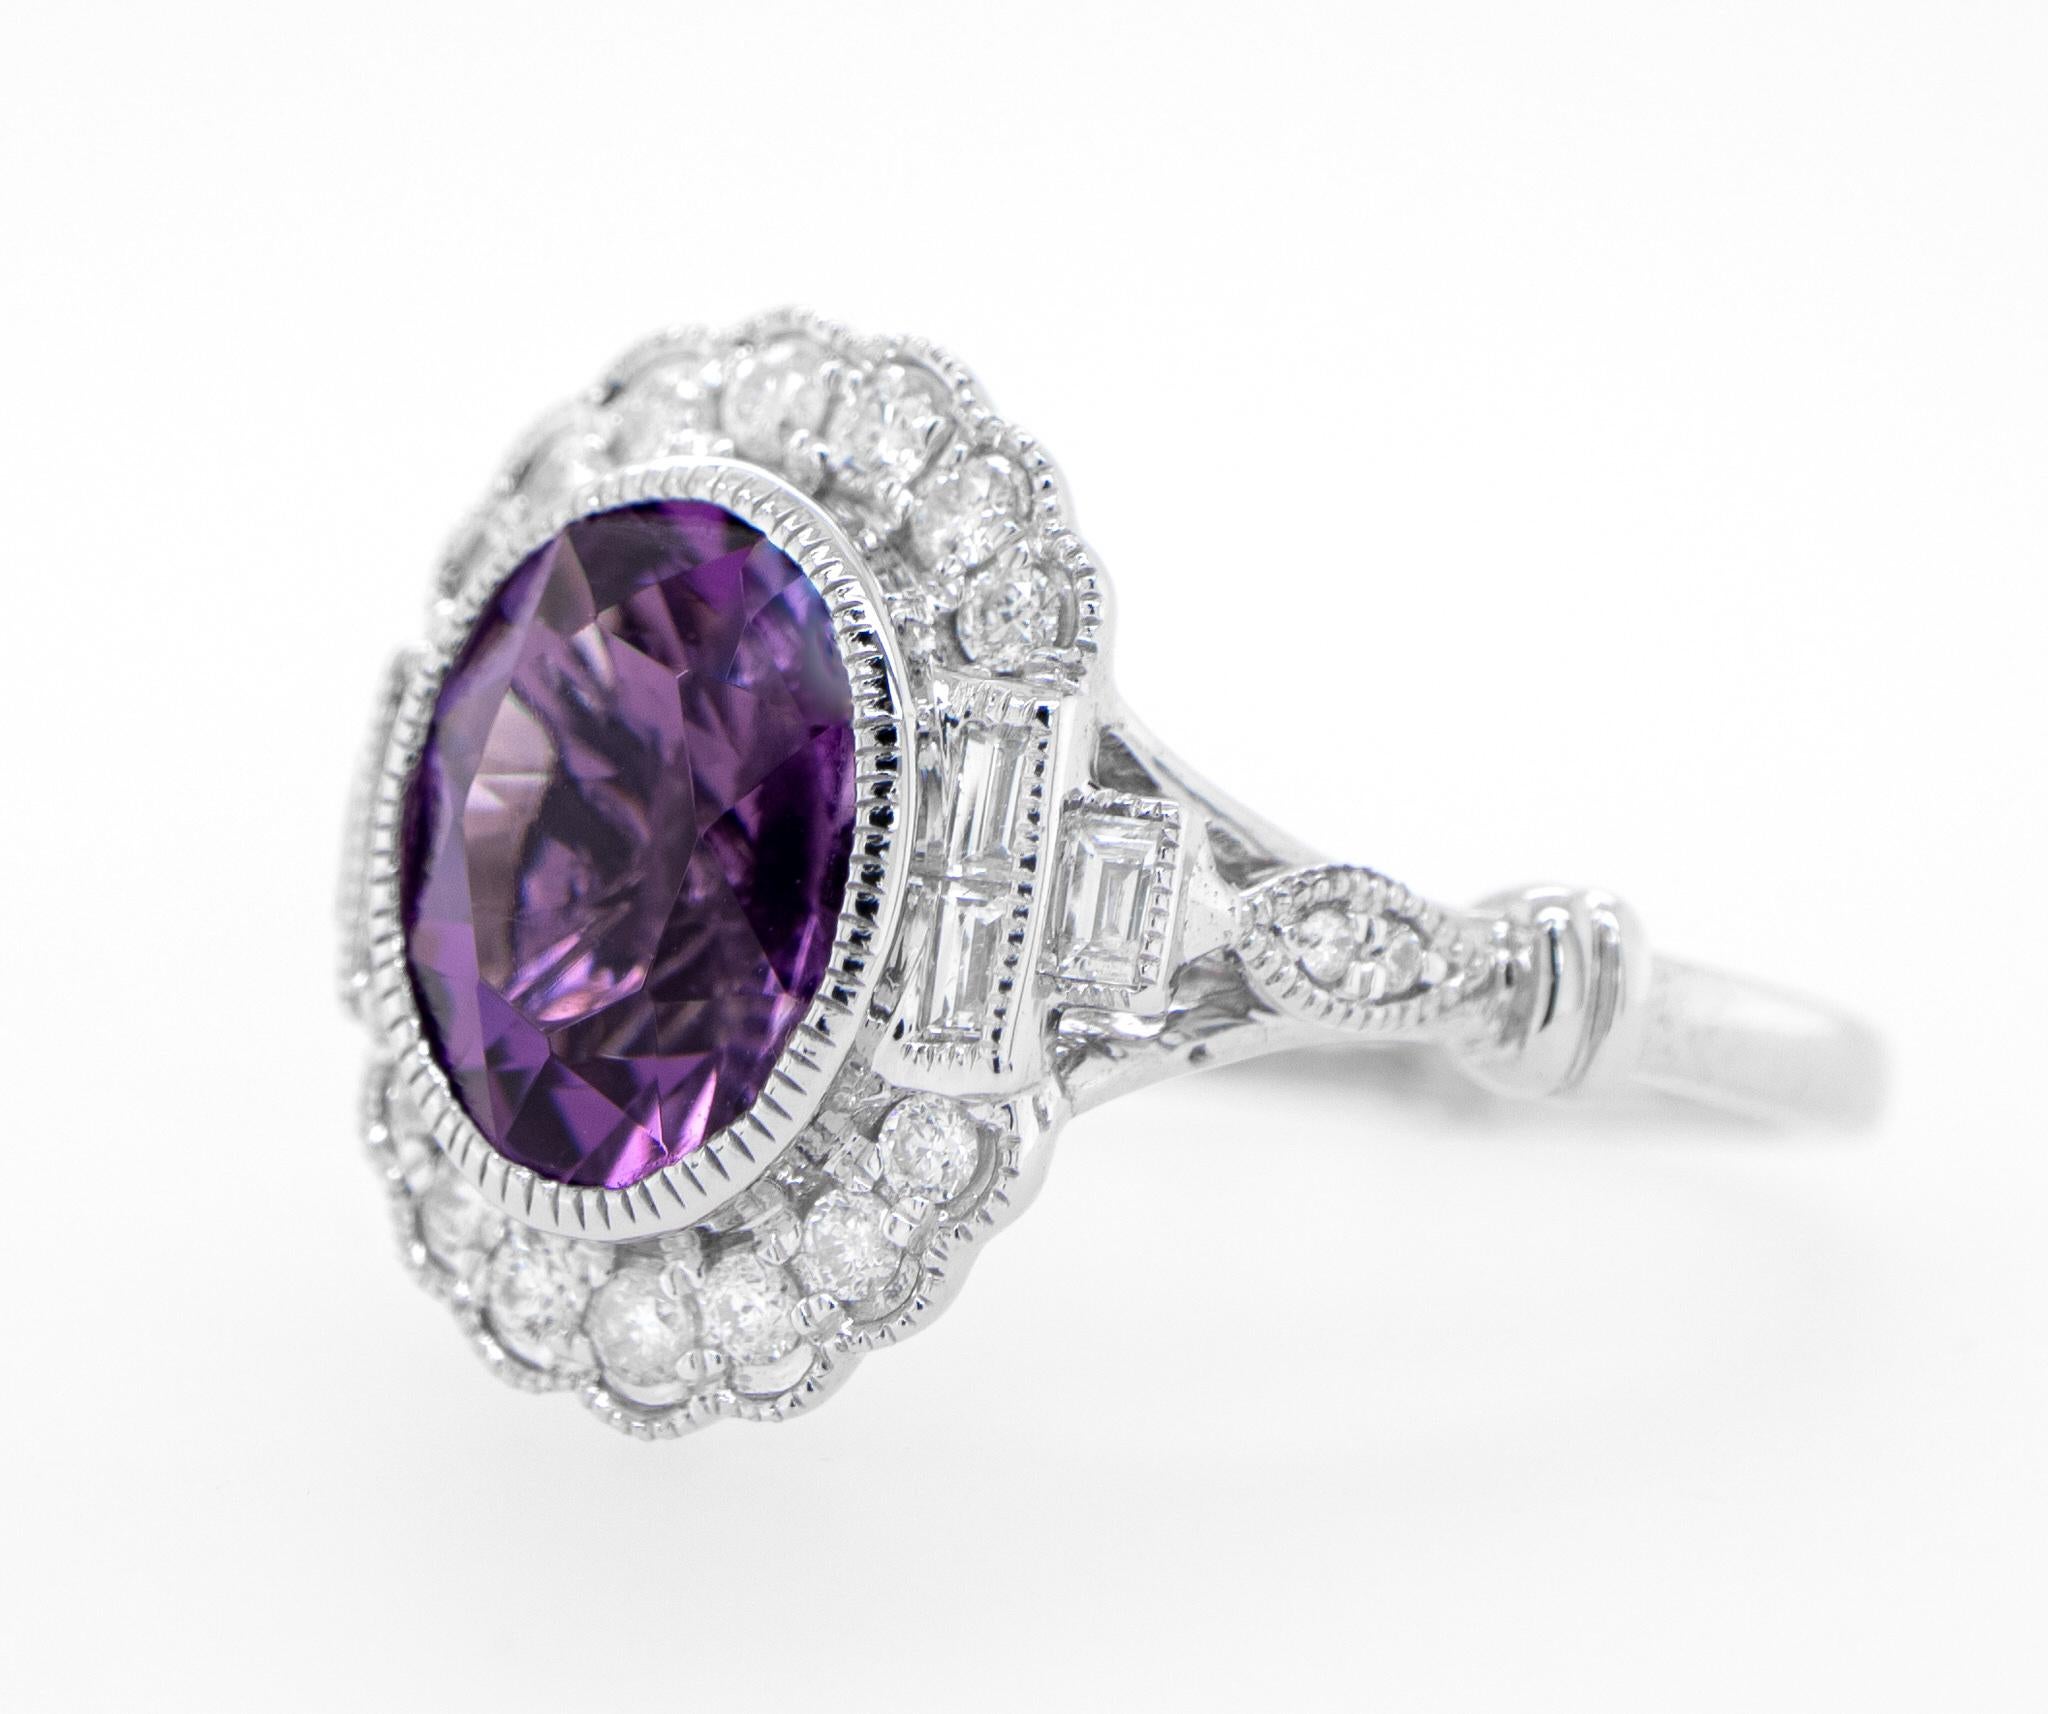 Art Deco Amethyst Ring Diamond Setting 2.30 Carats 18K Gold In Excellent Condition For Sale In Laguna Niguel, CA